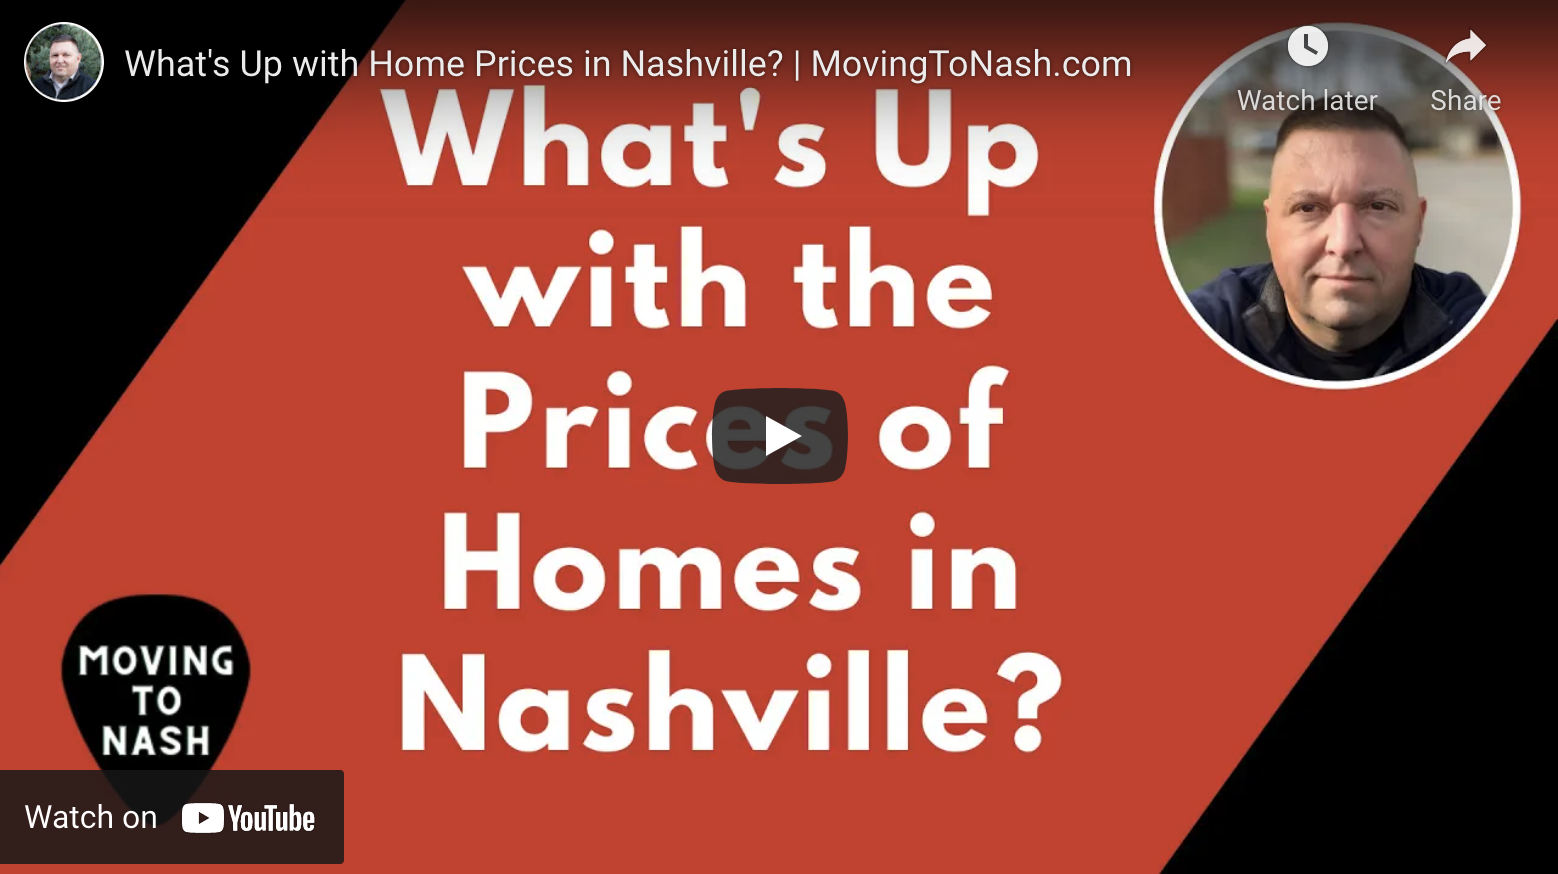 What's Up with the Price of Nashville Homes?